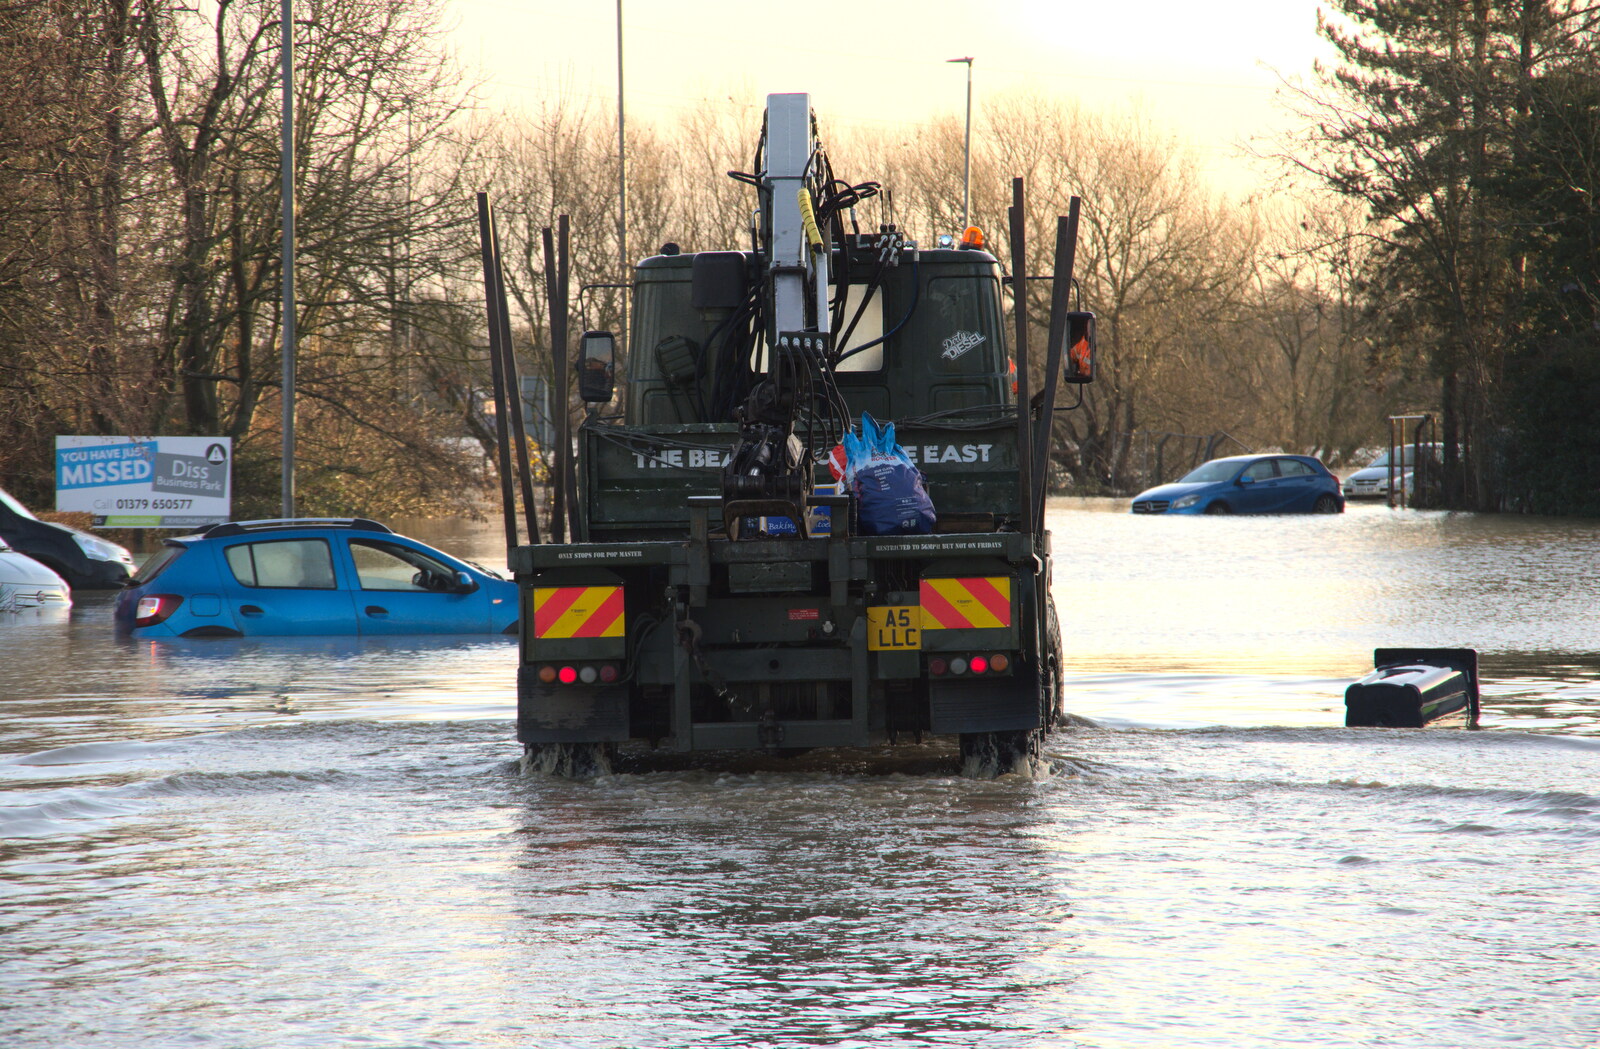 Driving through the floods from The Christmas Eve Floods, Diss, Norfolk - 24th December 2020